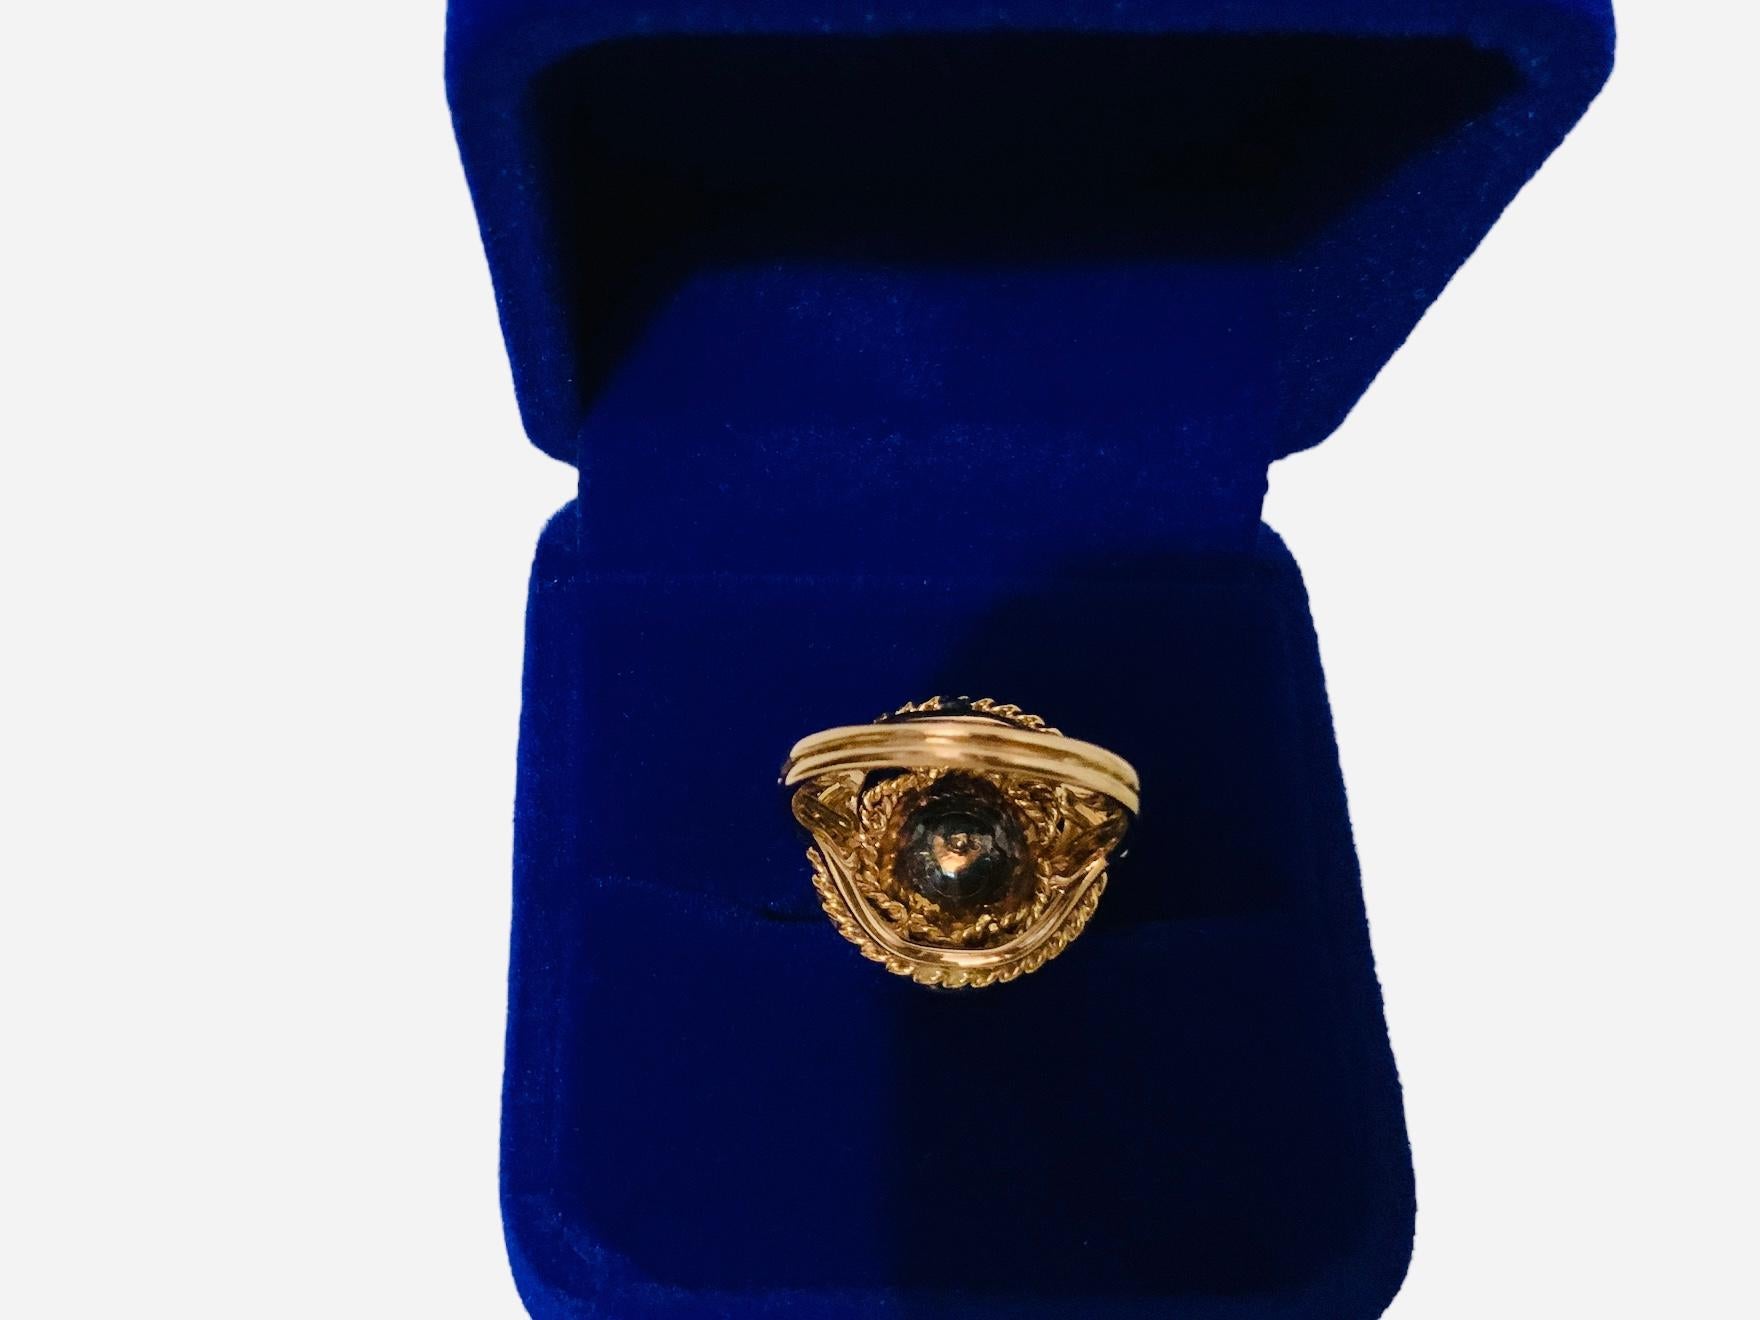 This is a 18K Gold Flower Design Cocktail Ring. It is a dome ring with four different levels. The lower level at the bottom is made of a gold rope. The third one is made of a gold swag followed by double ropes that are braided. Finally the first